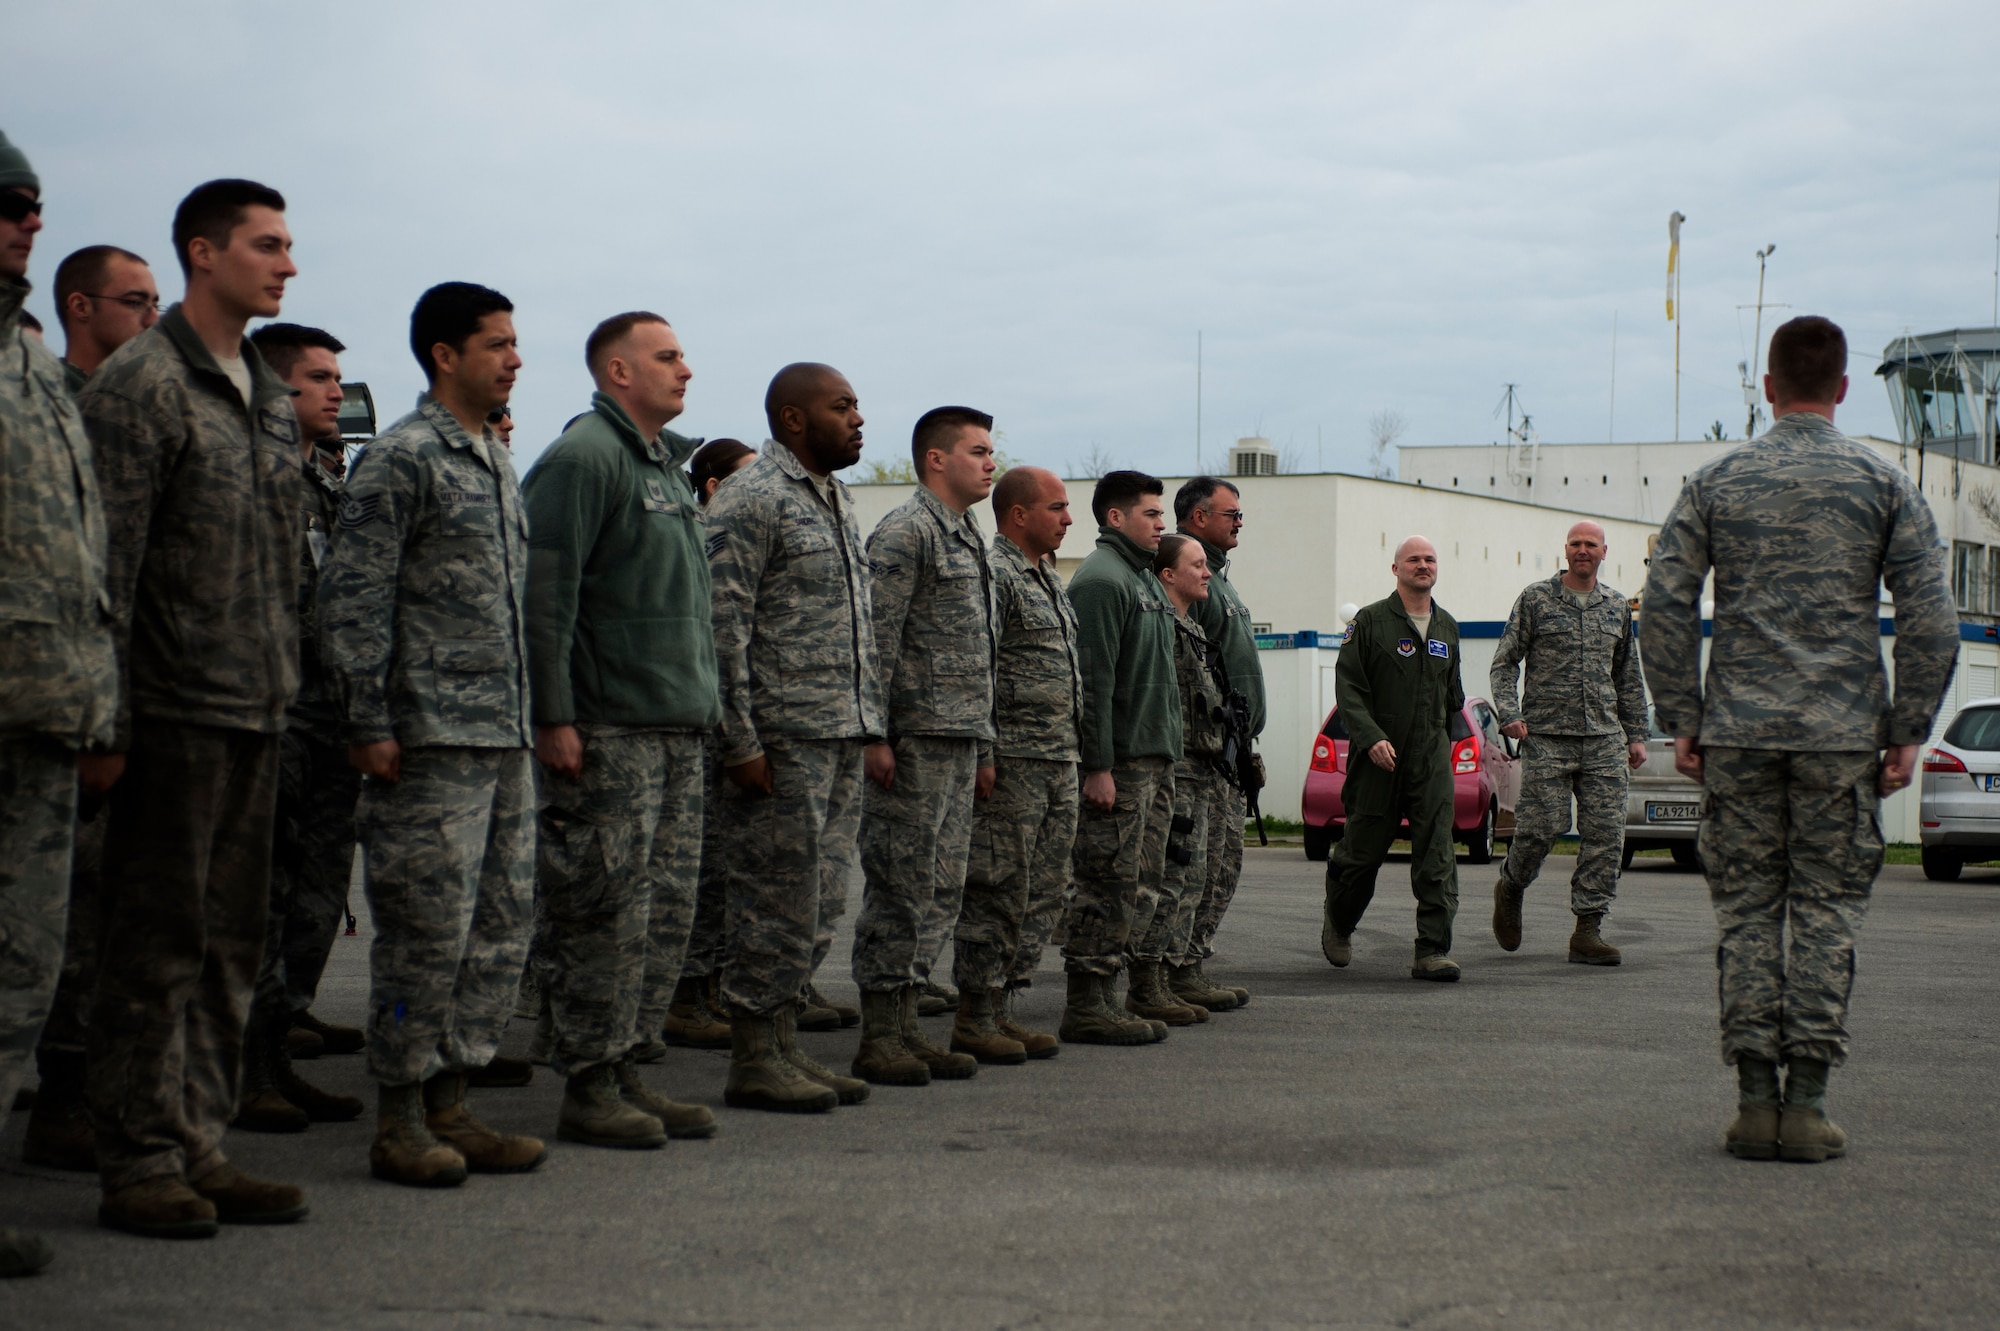 U.S. Air Force Lt. Col. Bryan France, 74th Expeditionary Fighter Squadron commander, center left, and Chief Master Sgt. Steven Cournoyer, 74th EFS chief enlisted manager, center right, walk to the front of a flight of mission support Airmen for a commander’s call during the 74th EFS’s deployment in support of Operation Atlantic Resolve at Graf Ignatievo, Bulgaria, March 16, 2016. The Airmen served in various communications, security forces, civil engineer, contracting, force support and logistics capacities to augment the 74th EFS’s six-month deployment to Eastern Europe. (U.S. Air Force photo by Staff Sgt. Joe W. McFadden/Released)